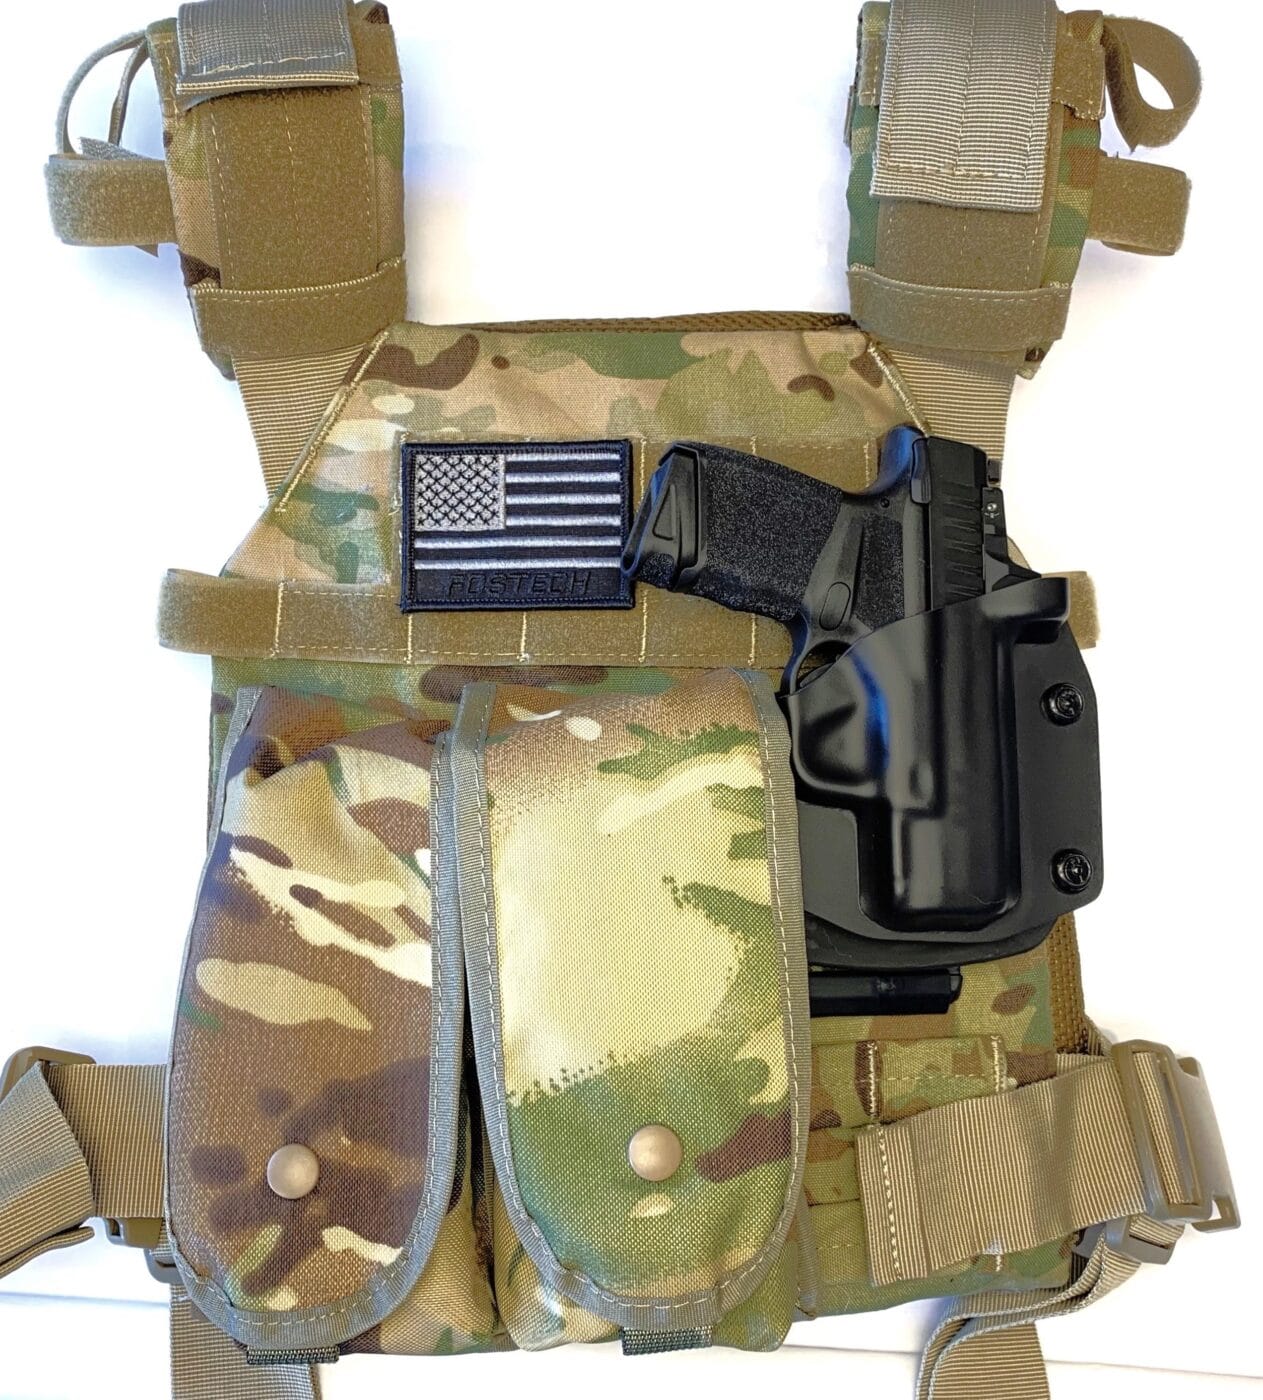 Carrying Hellcat pistol on a plate carrier with an Alien Gear holster